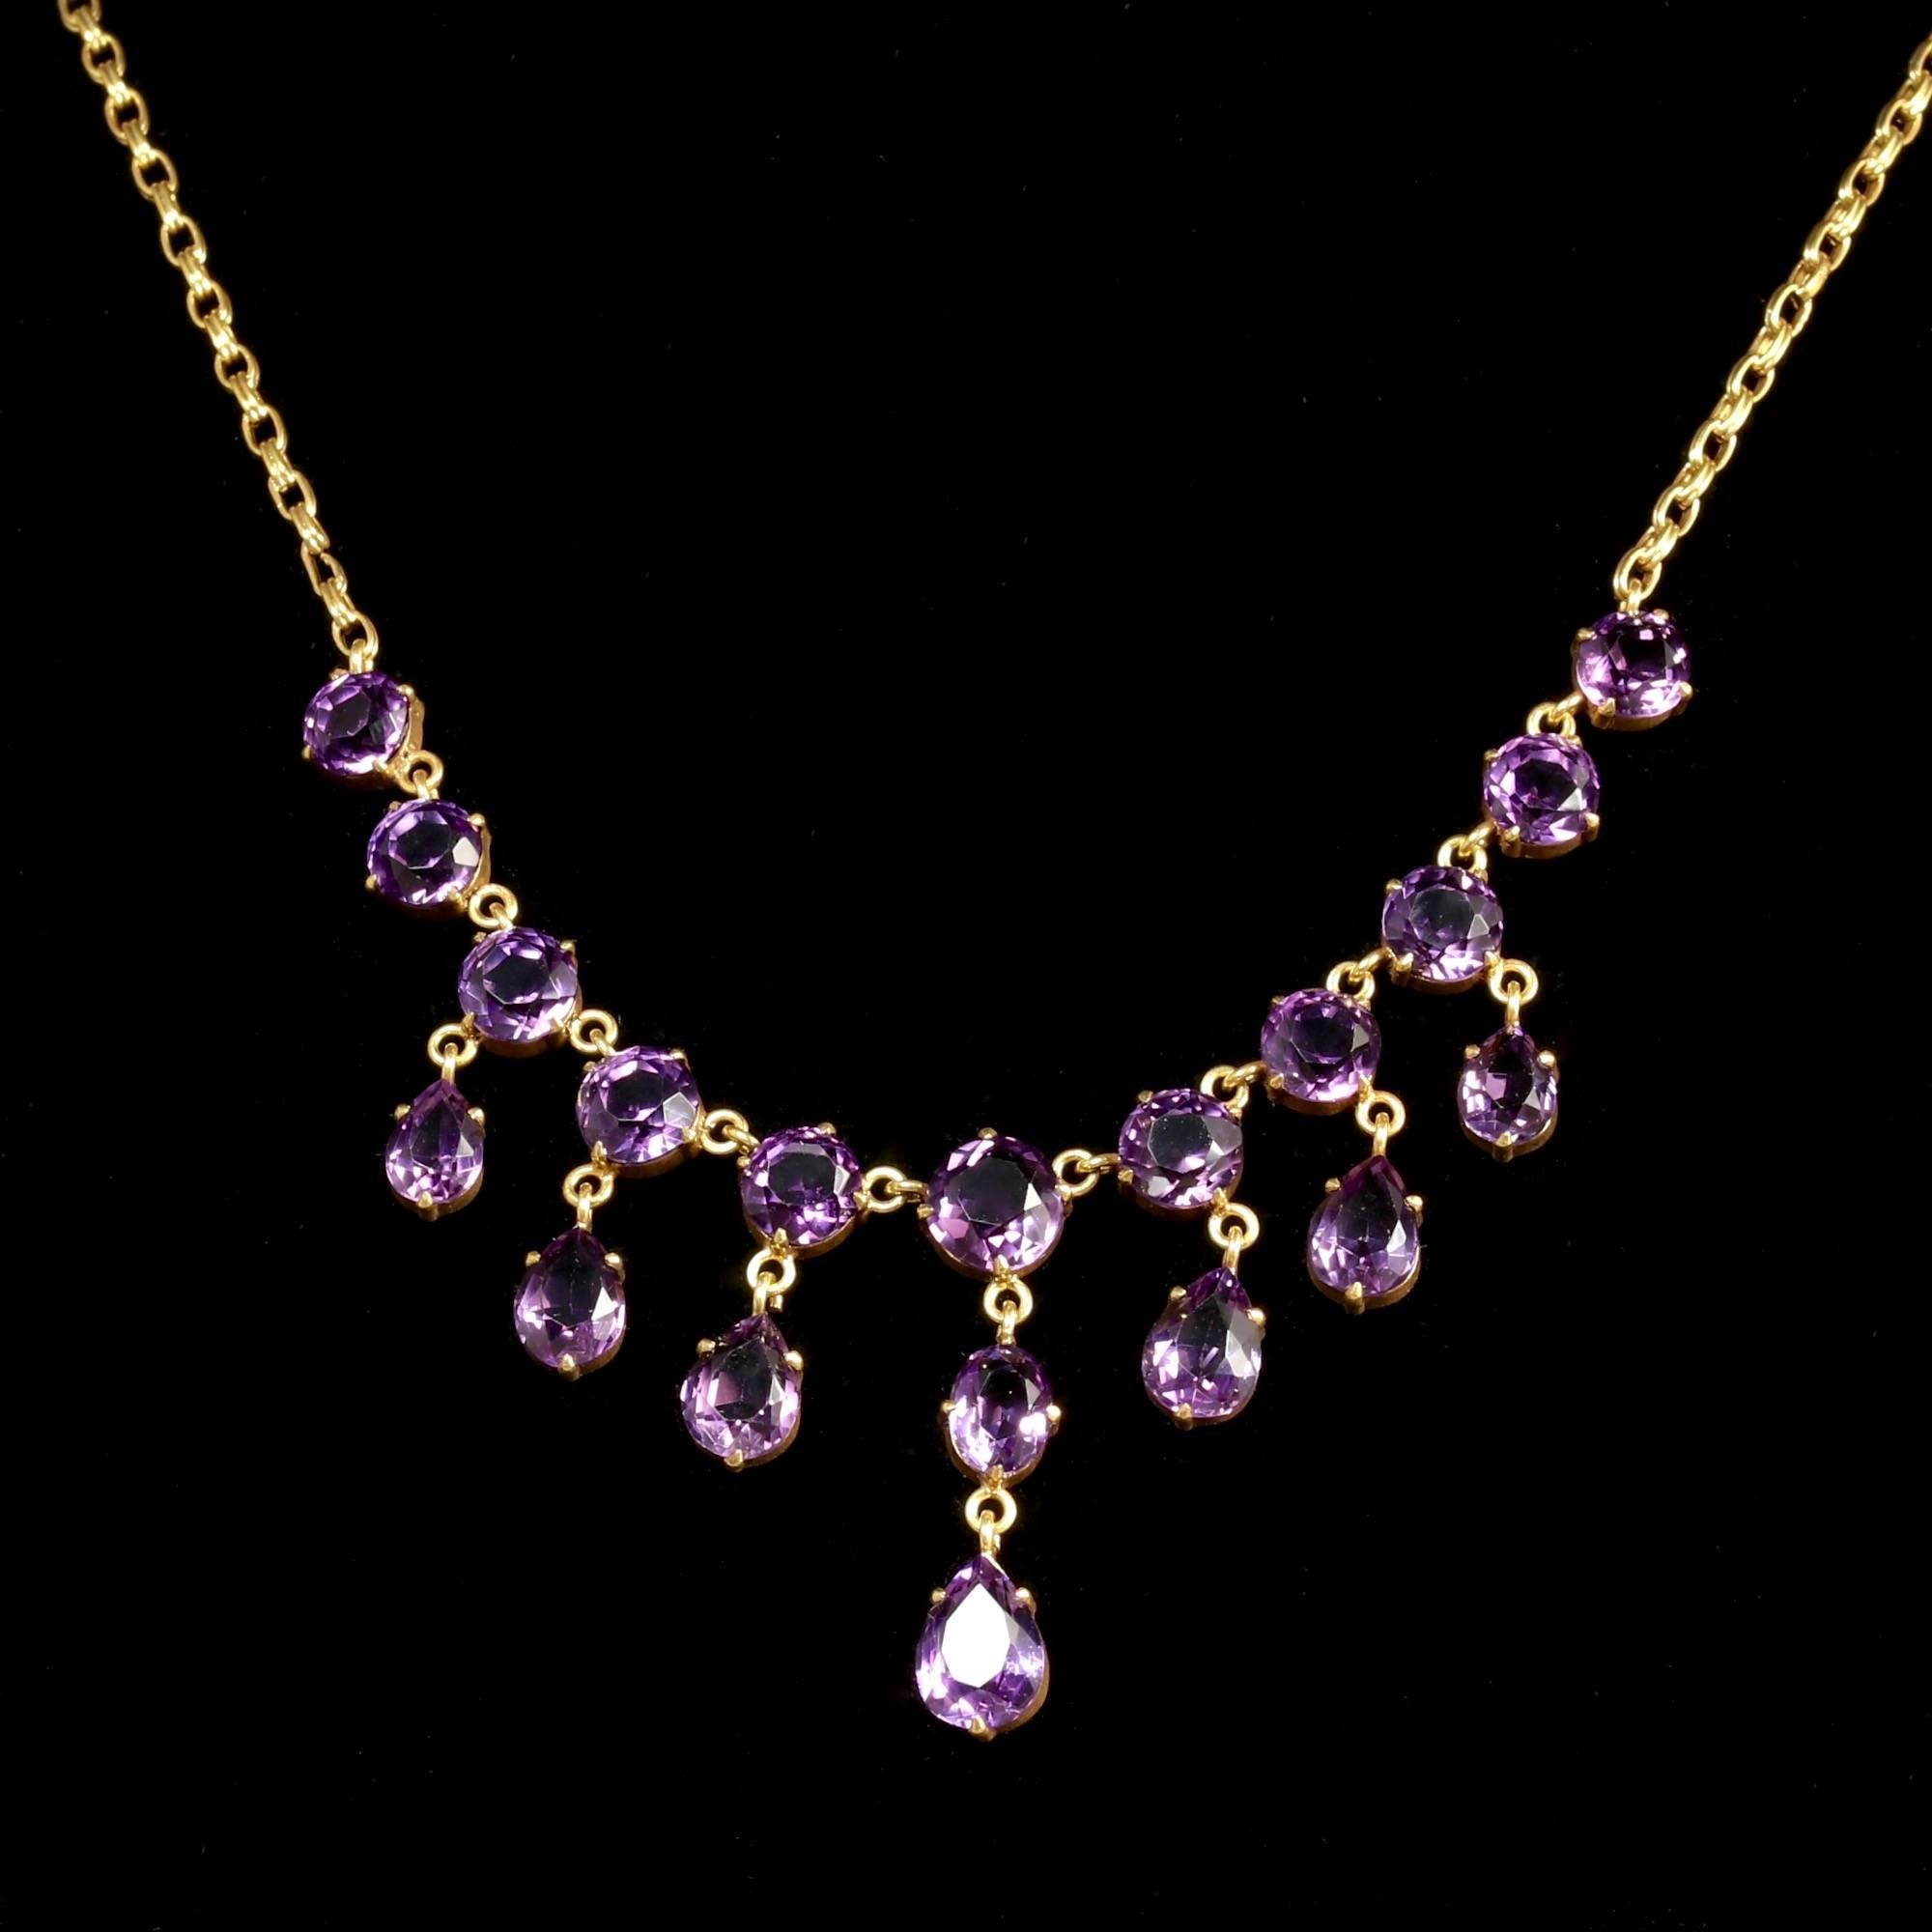 This spectacular Antique Victorian 18ct Gold on Silver Garland Amethyst necklace is Circa 1900.

Set with breathtaking rich purple Amethysts that compliment the necklace superbly.

The necklace have seven pendant droppers.

The Purple Amethyst has